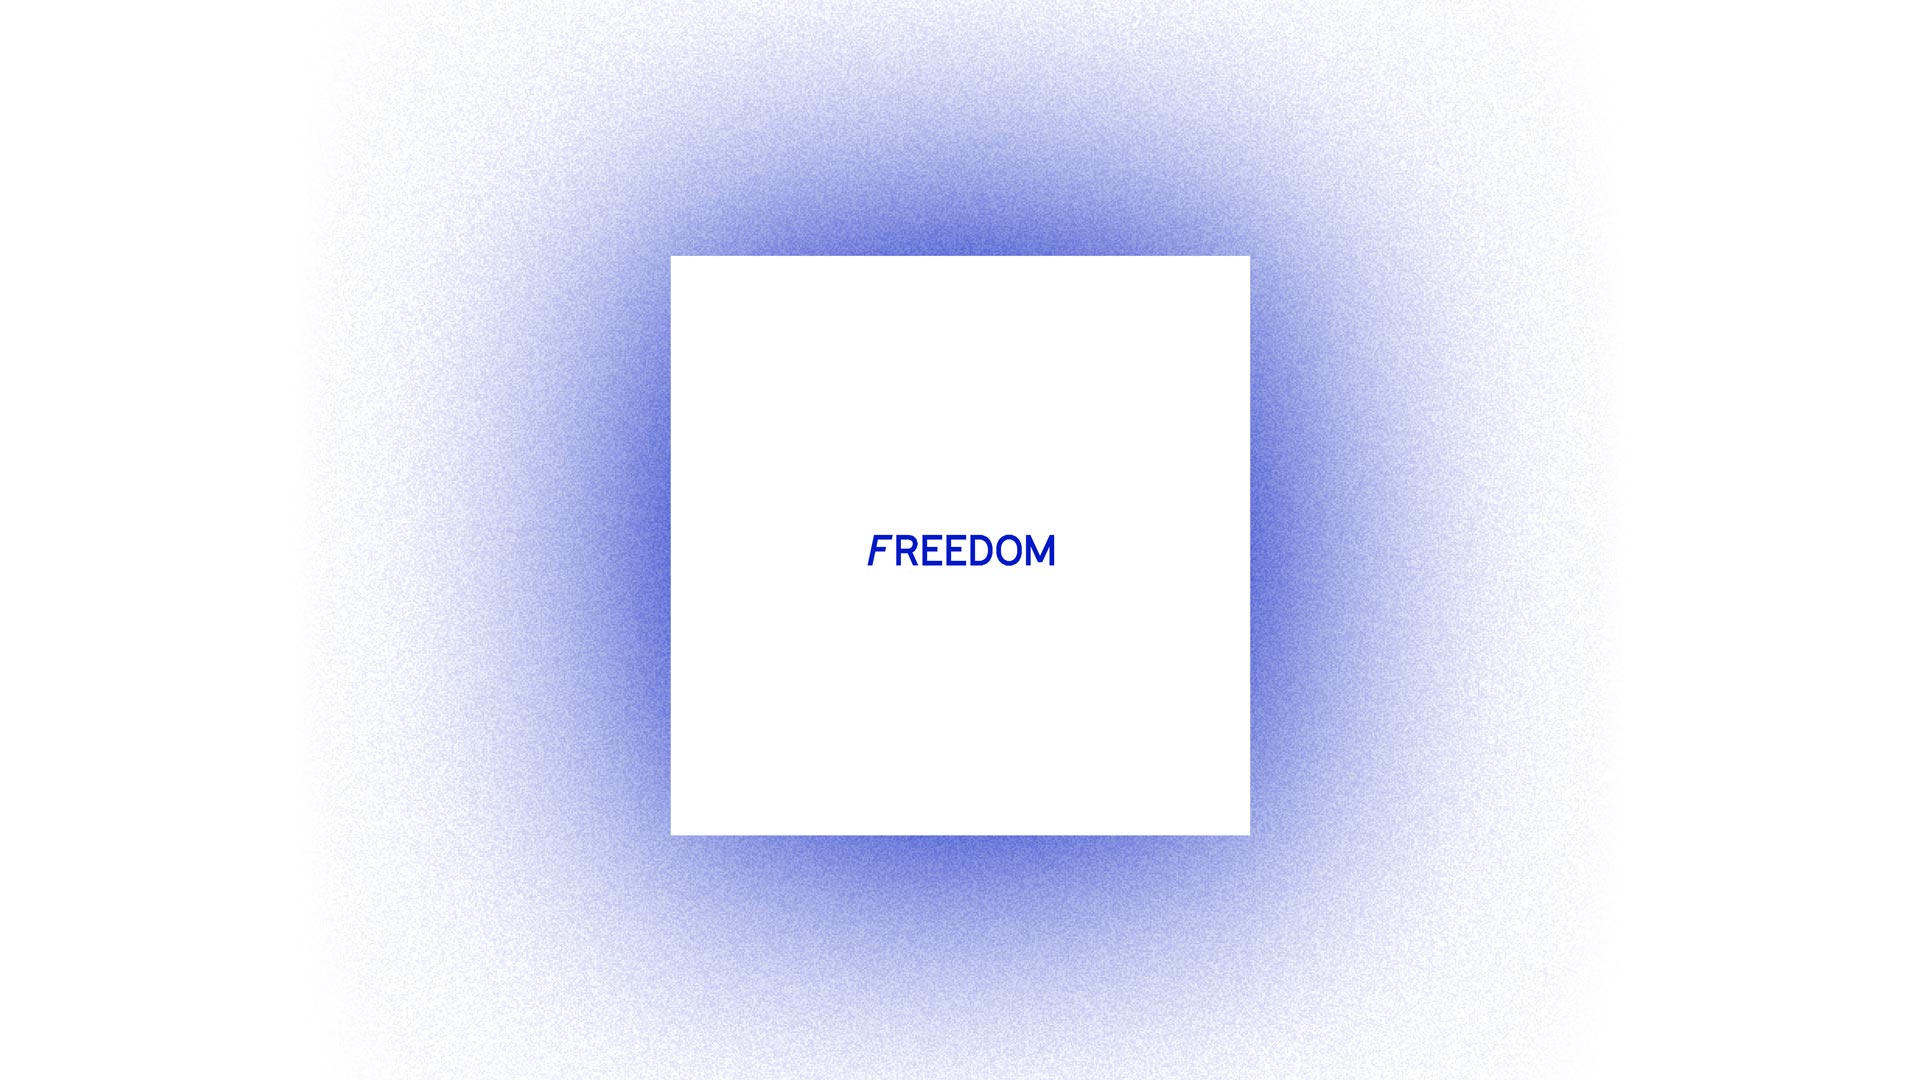 Freedom; blue type on white box over a soft blue gradient